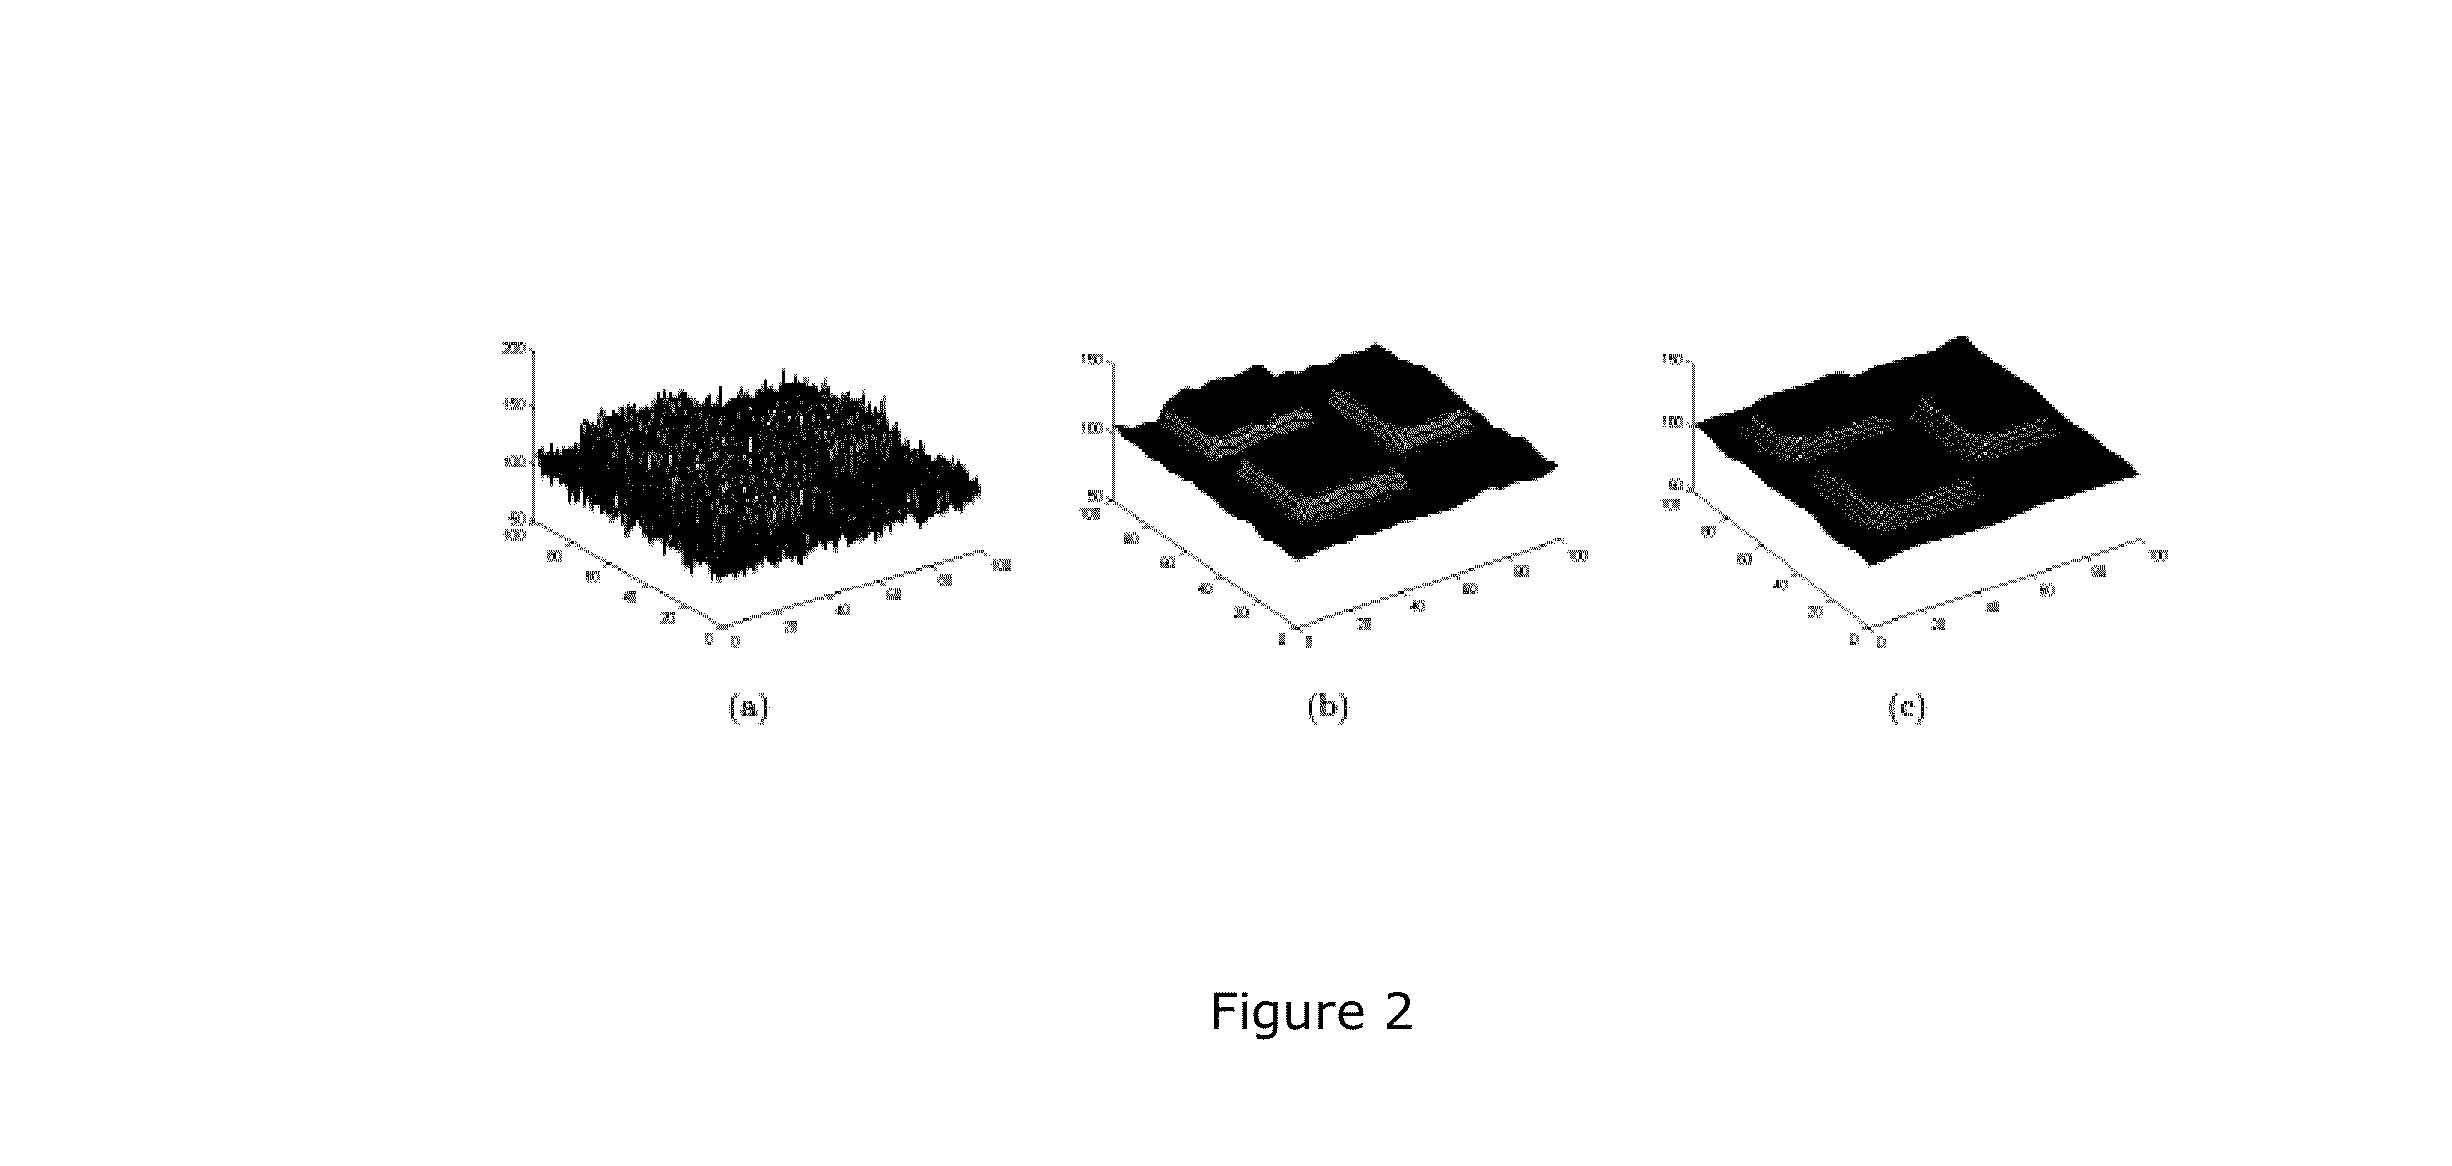 Method and System for Removal of Fog, Mist, or Haze from Images and Videos